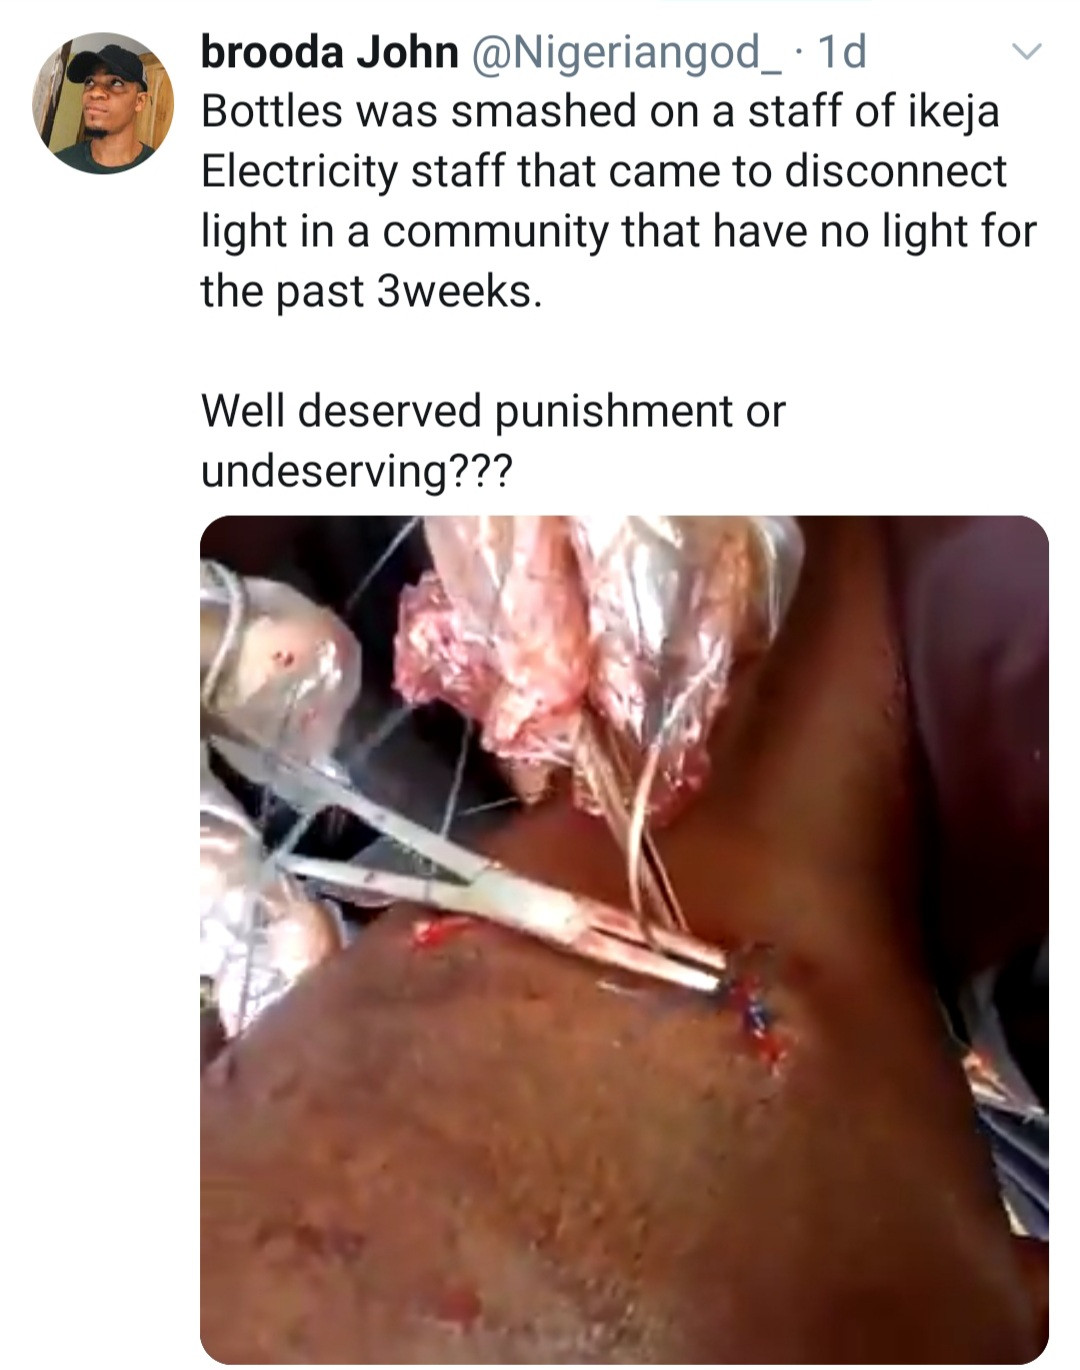 IKEDC staff stabbed on the head with bottle when he tried to disconnect power from a community (video)